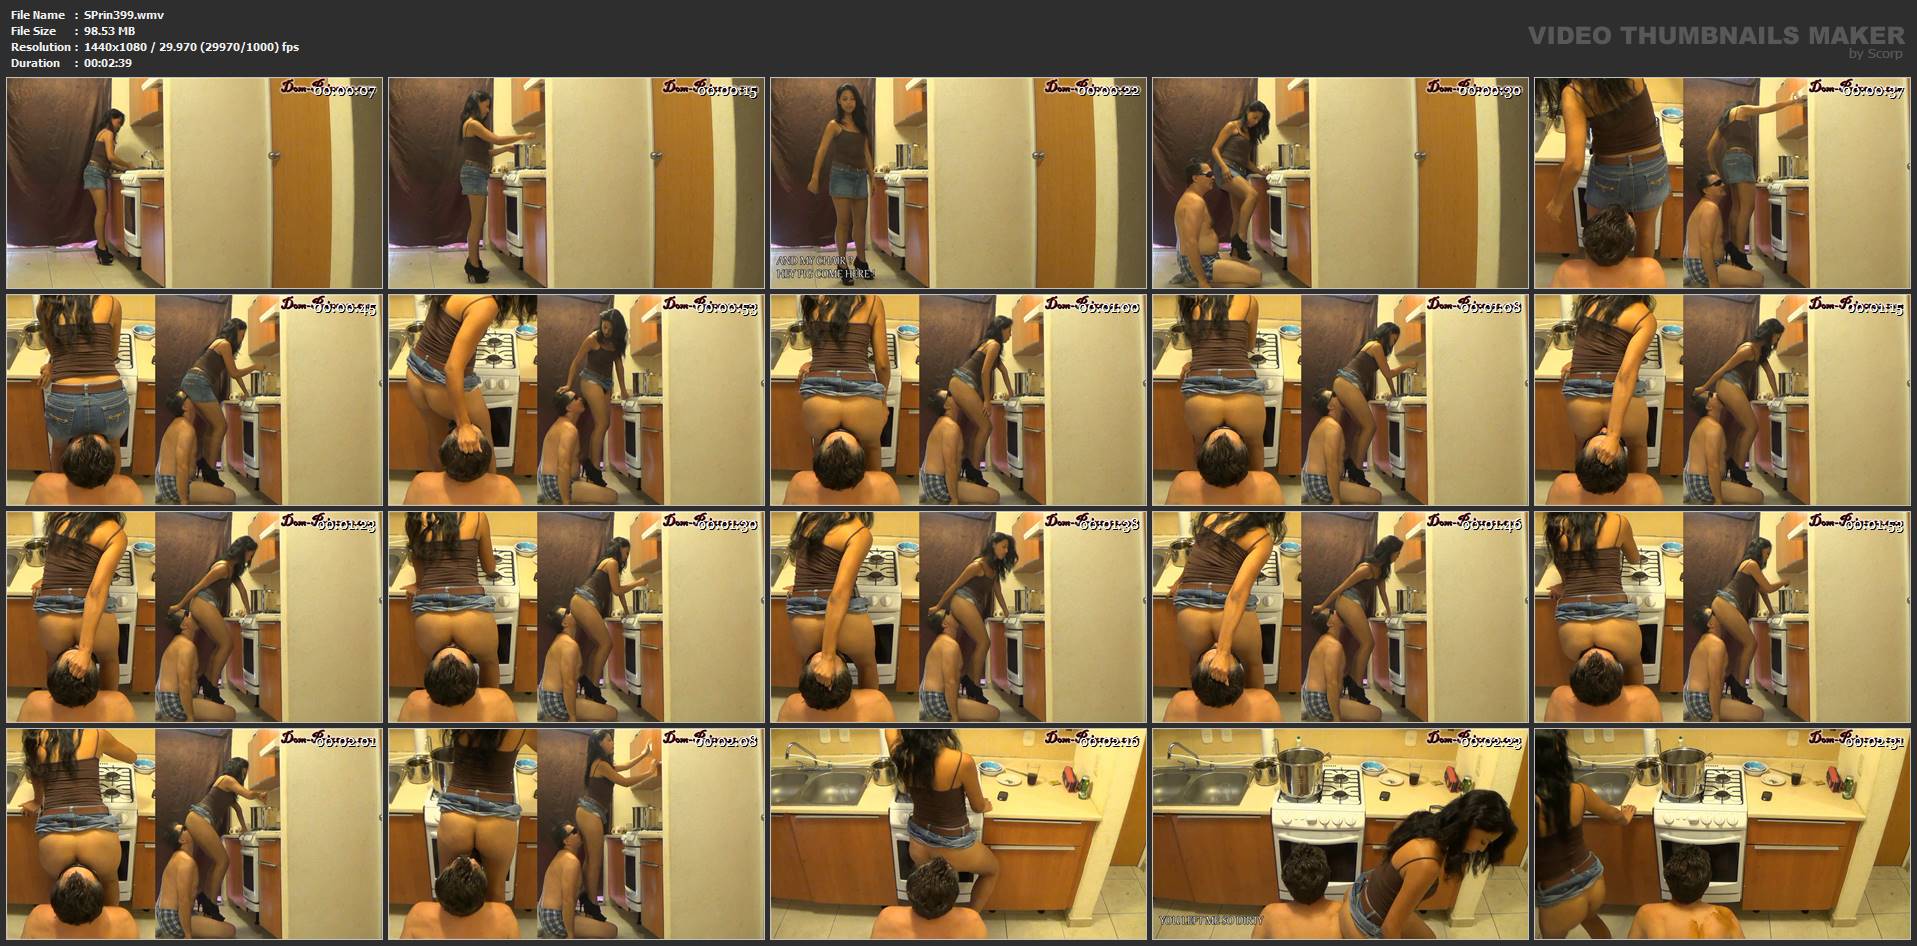 [SCAT-PRINCESS] Cooking and Pooping Part 6 Diana [FULL HD][1080p][WMV]